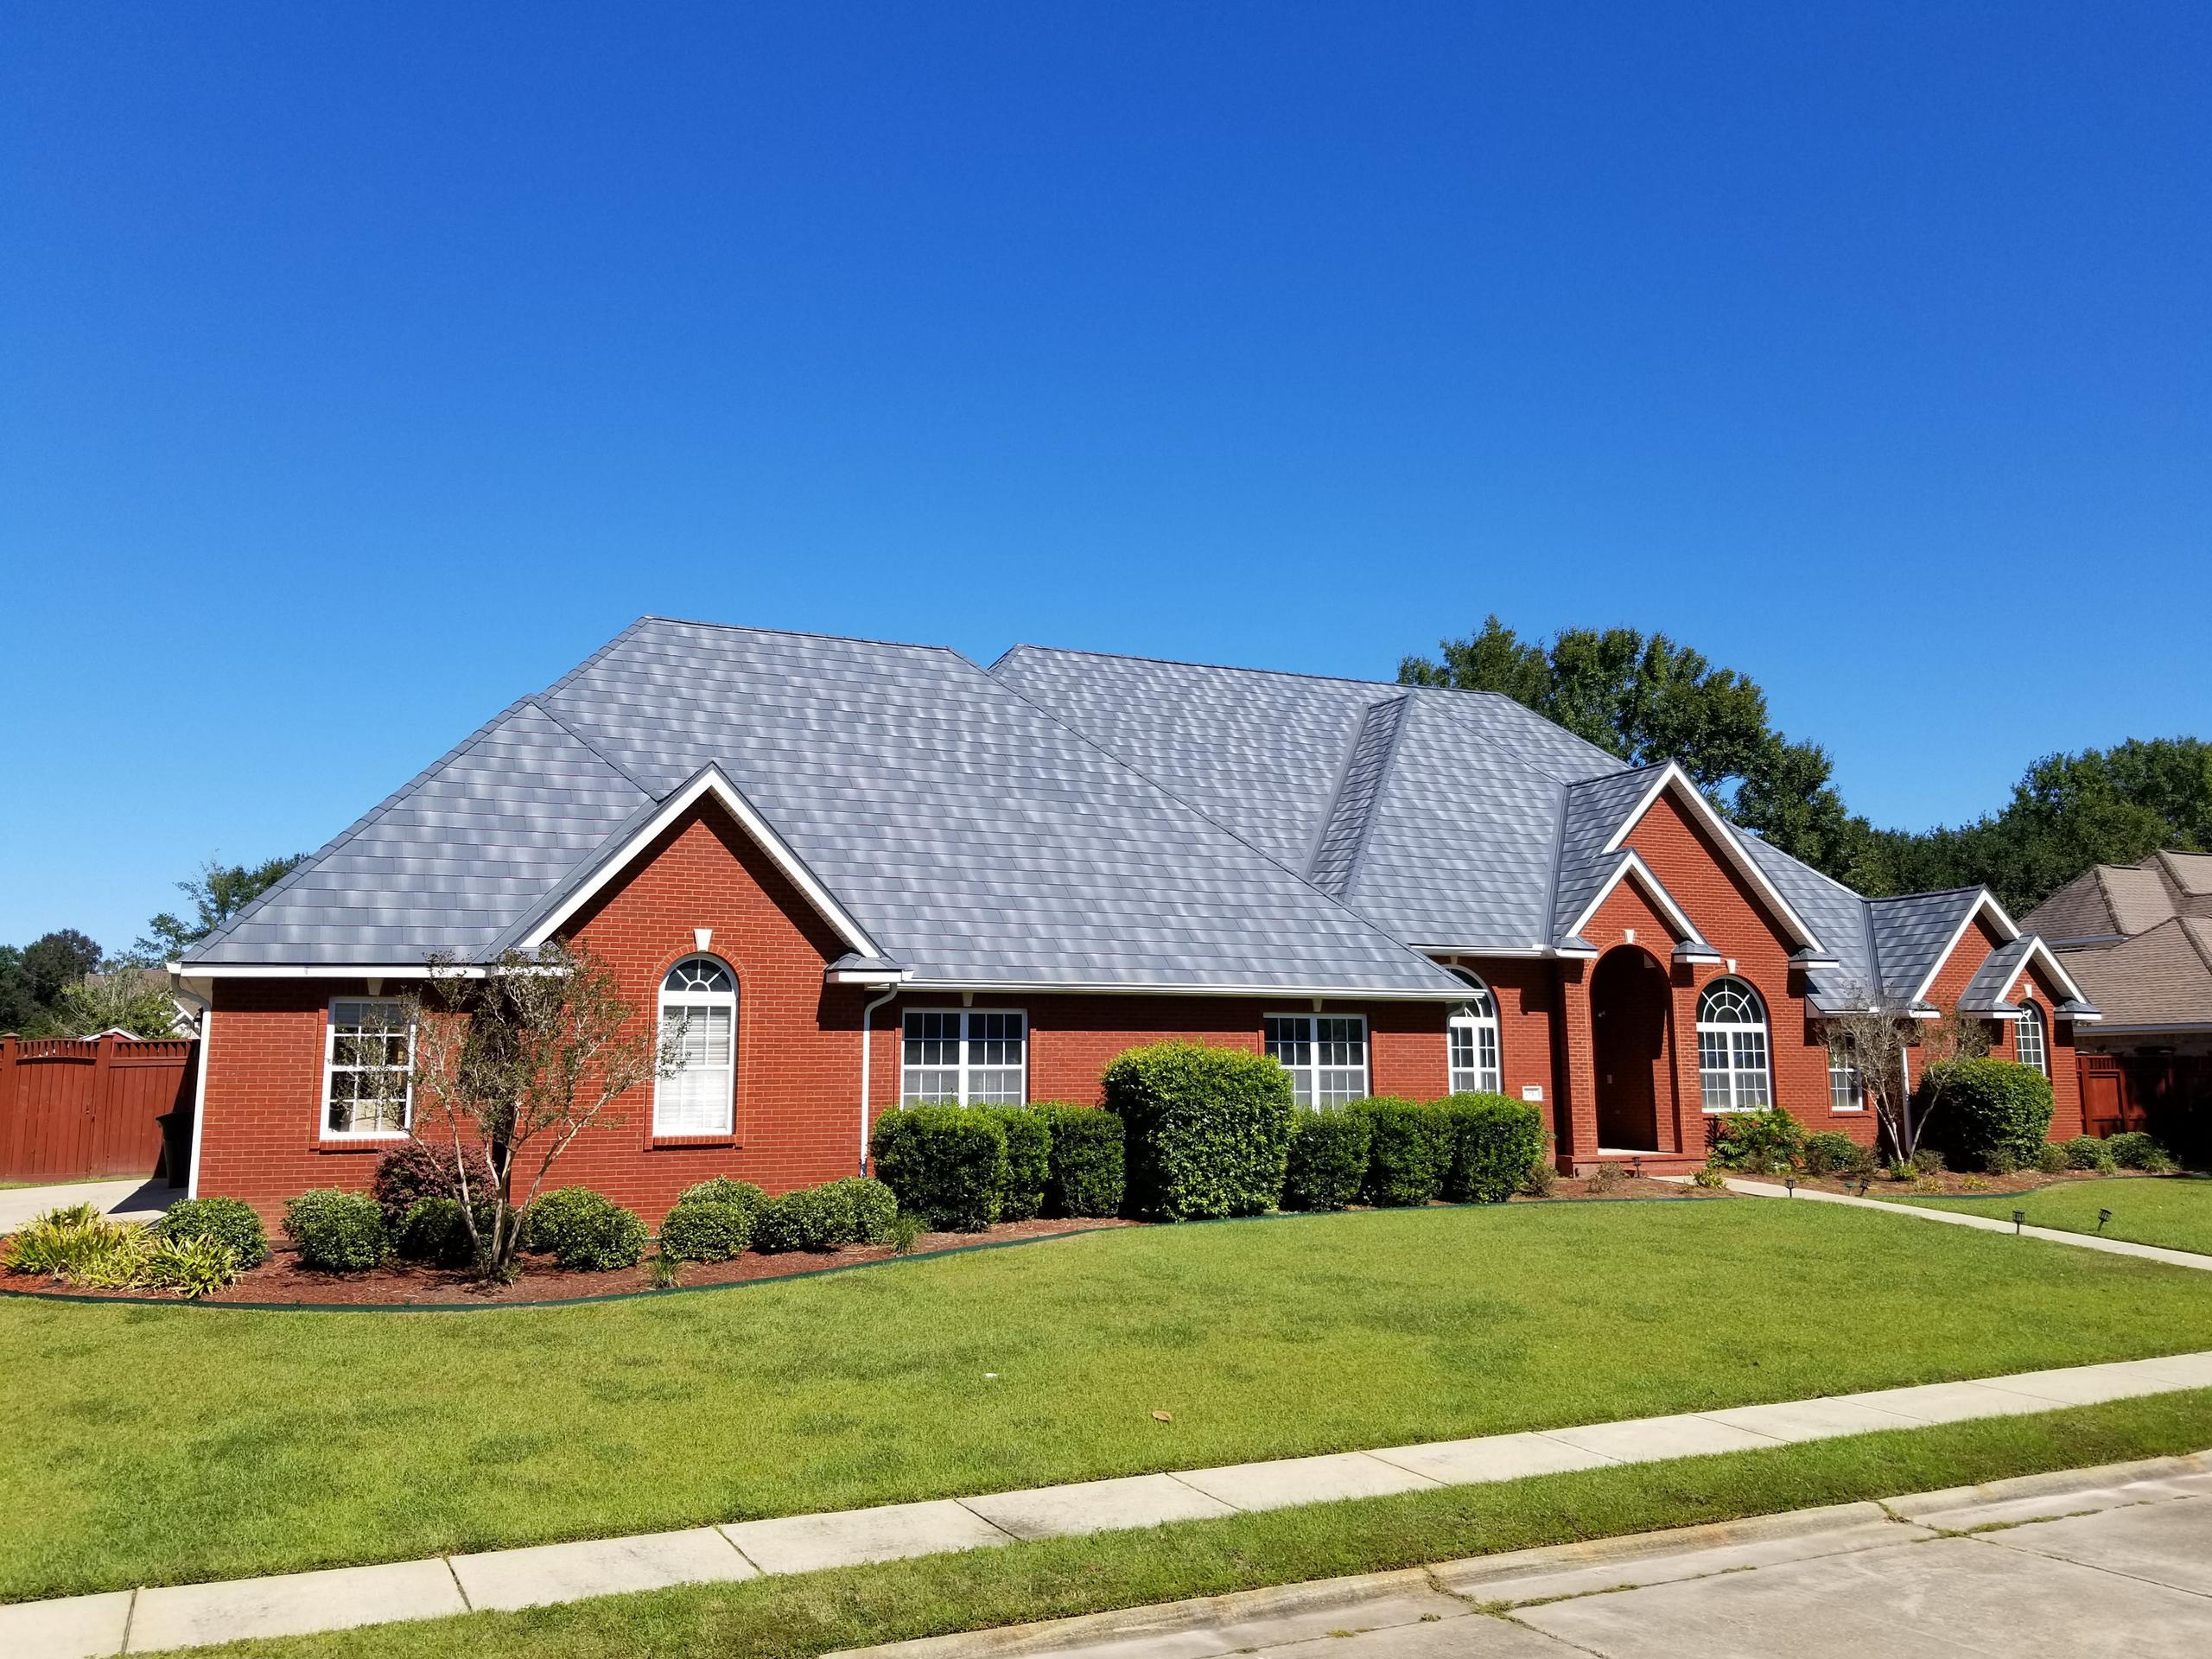 The award-winning Infiniti roofing from EDCO in Granite Gray Enhanced was selected for this red brick home to give it a distinctive appearance the is unmatched.